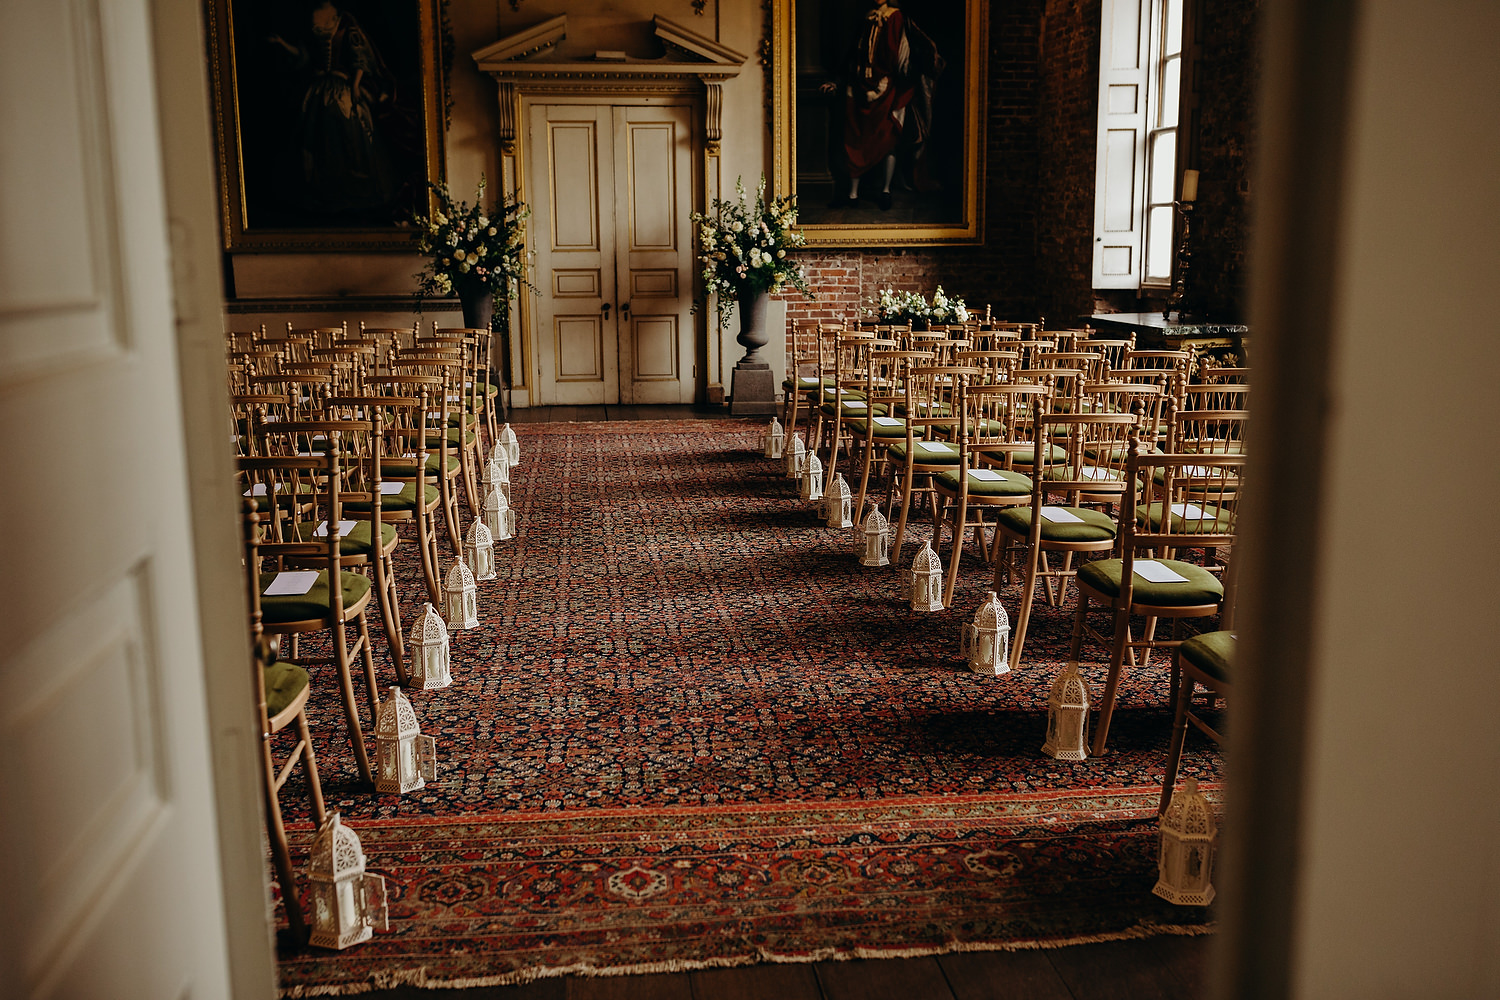 ceremony room at St Giles house